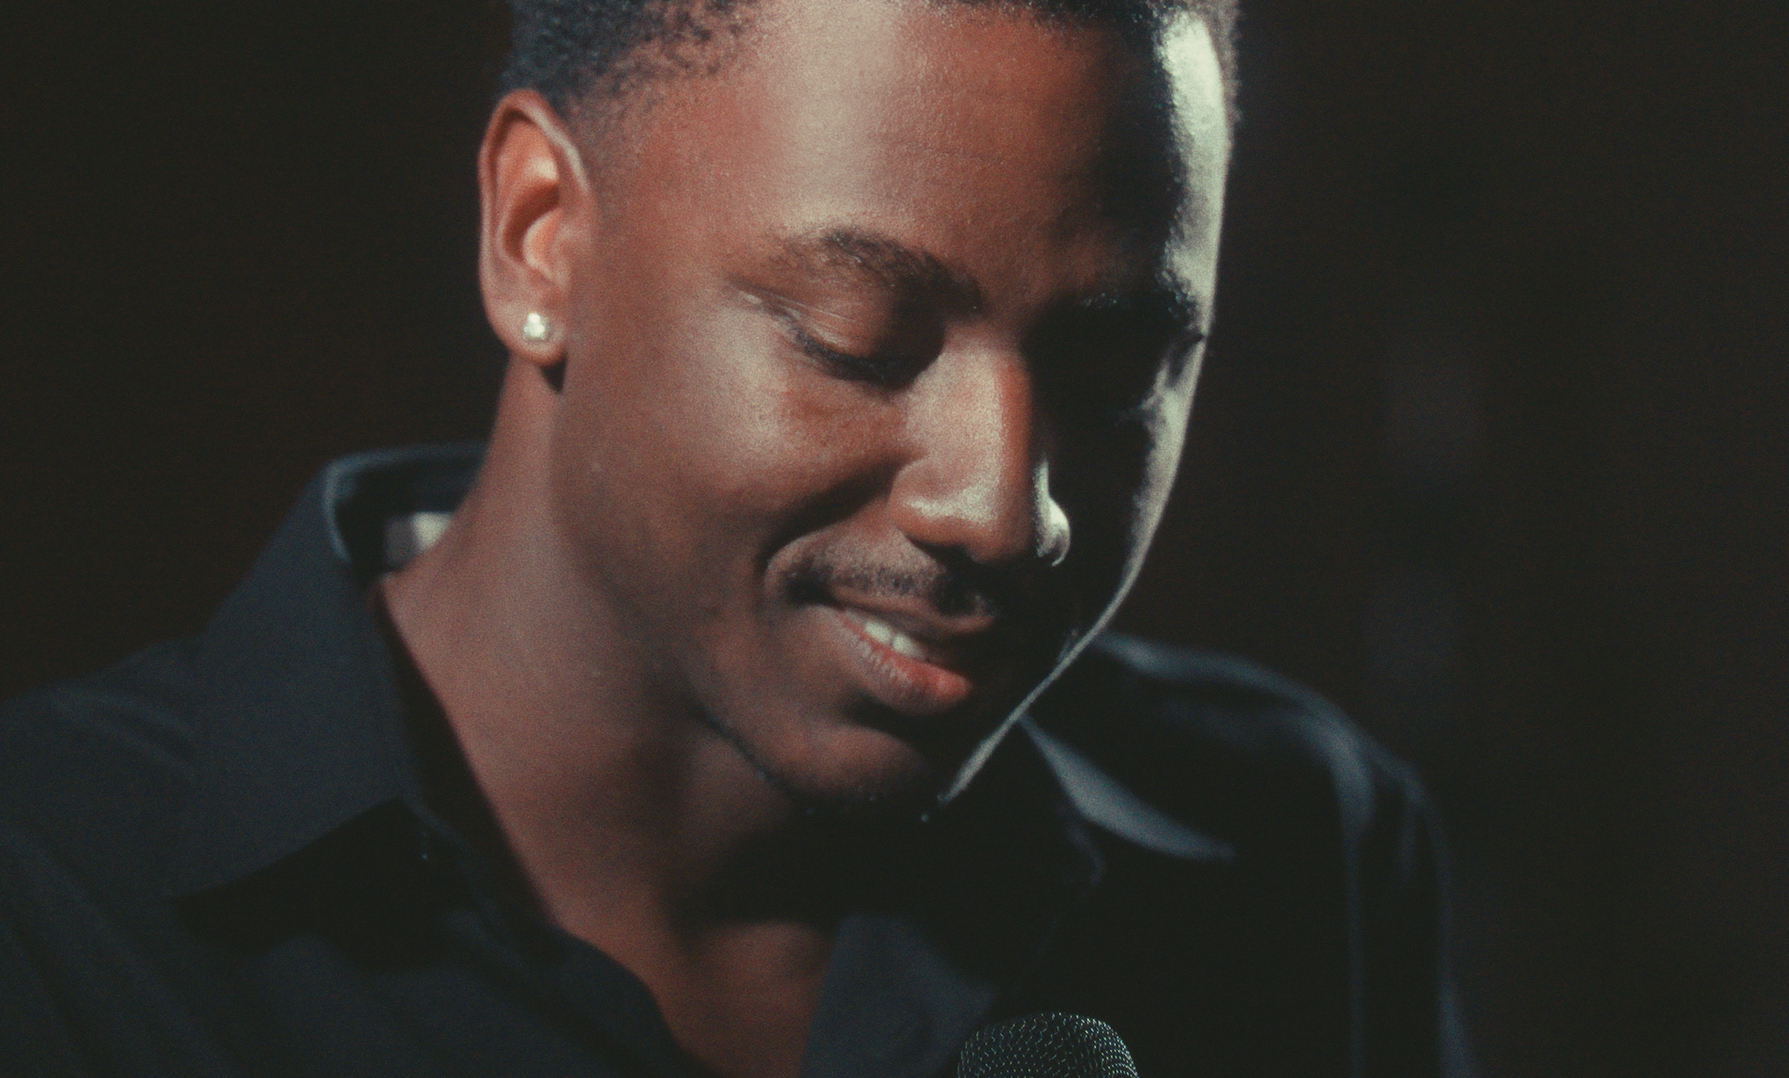 Close up on a young Black man's face and shoulders. He is glancing downwards and smiling.